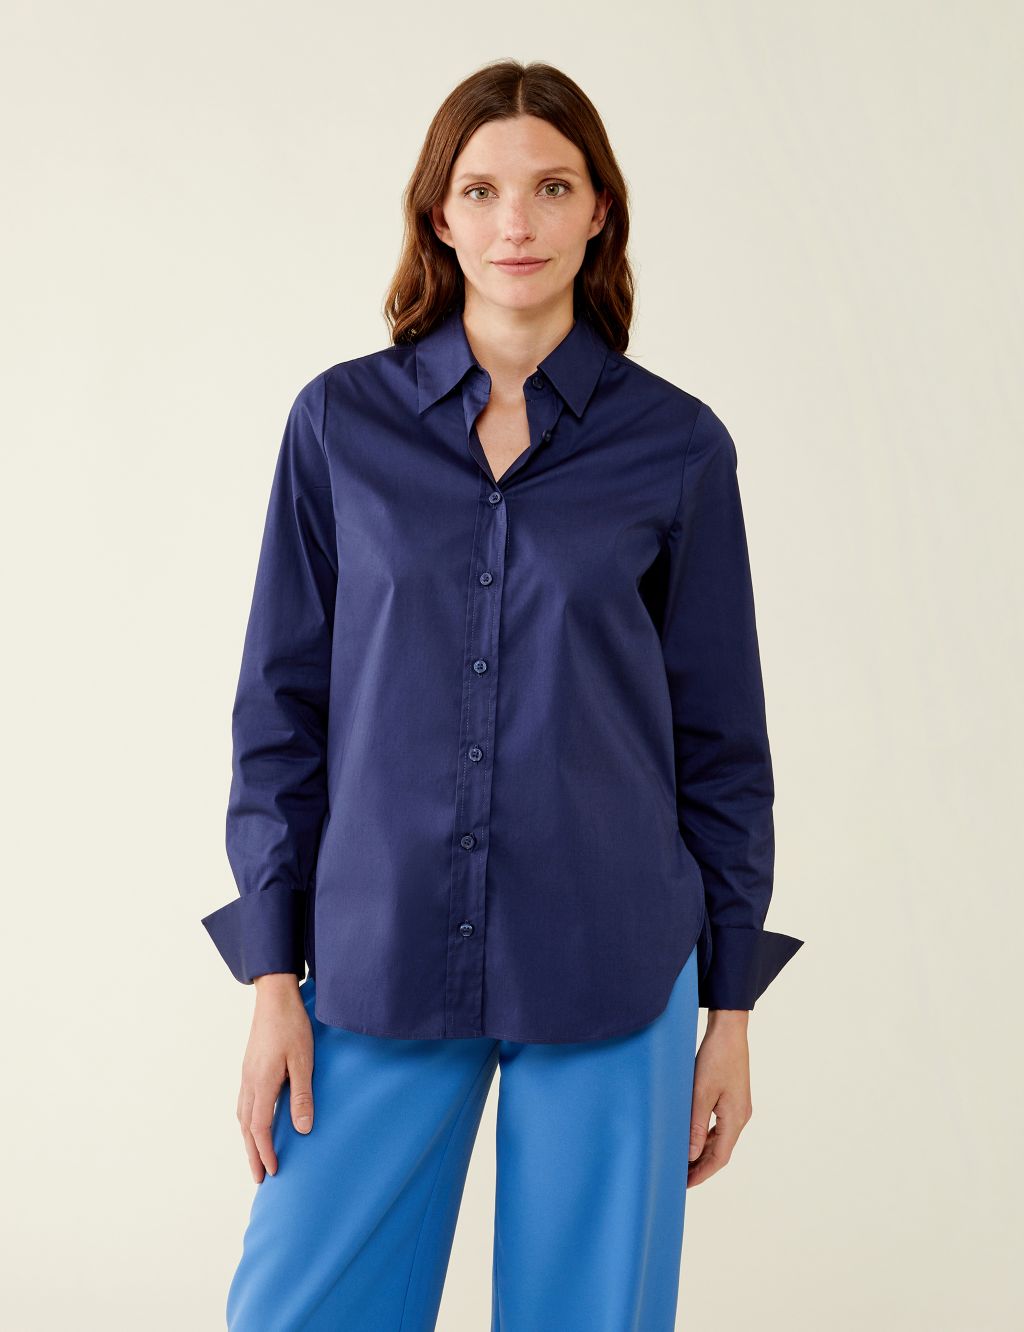 Cotton Rich Collared Shirt image 1